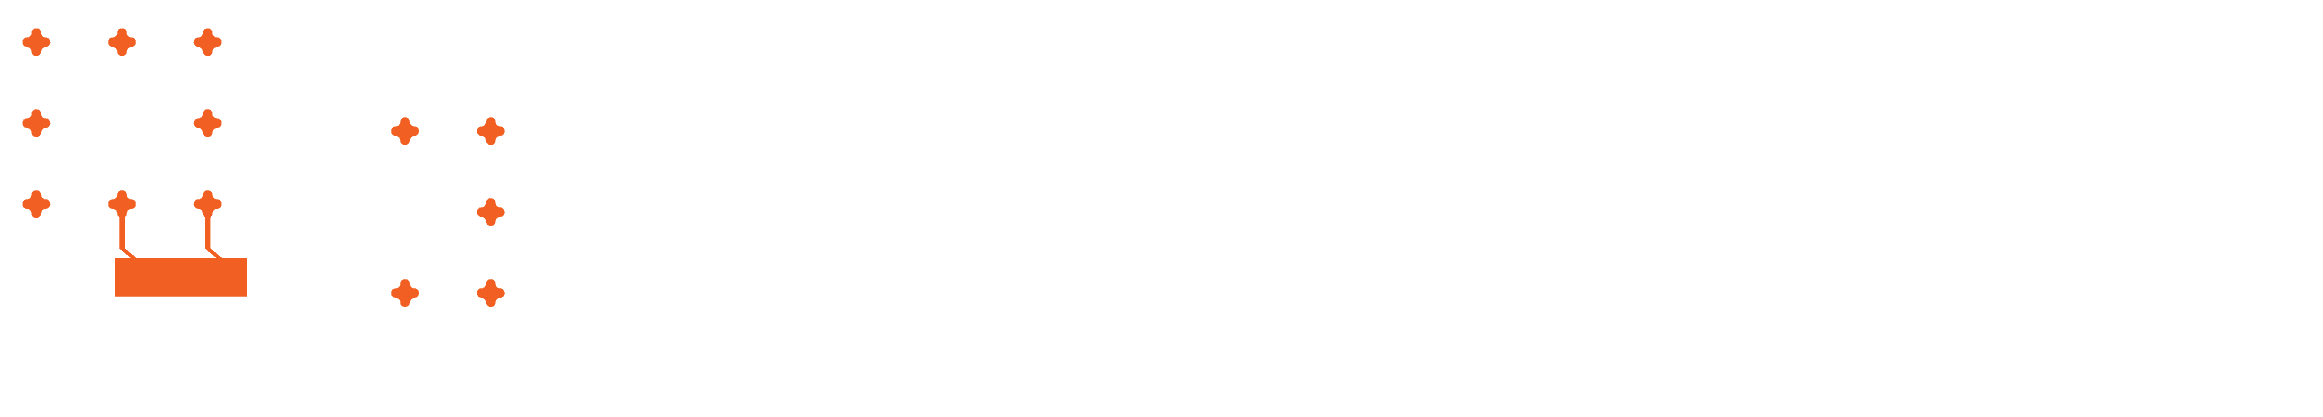 Wikstrom Engineering Consulting, PC